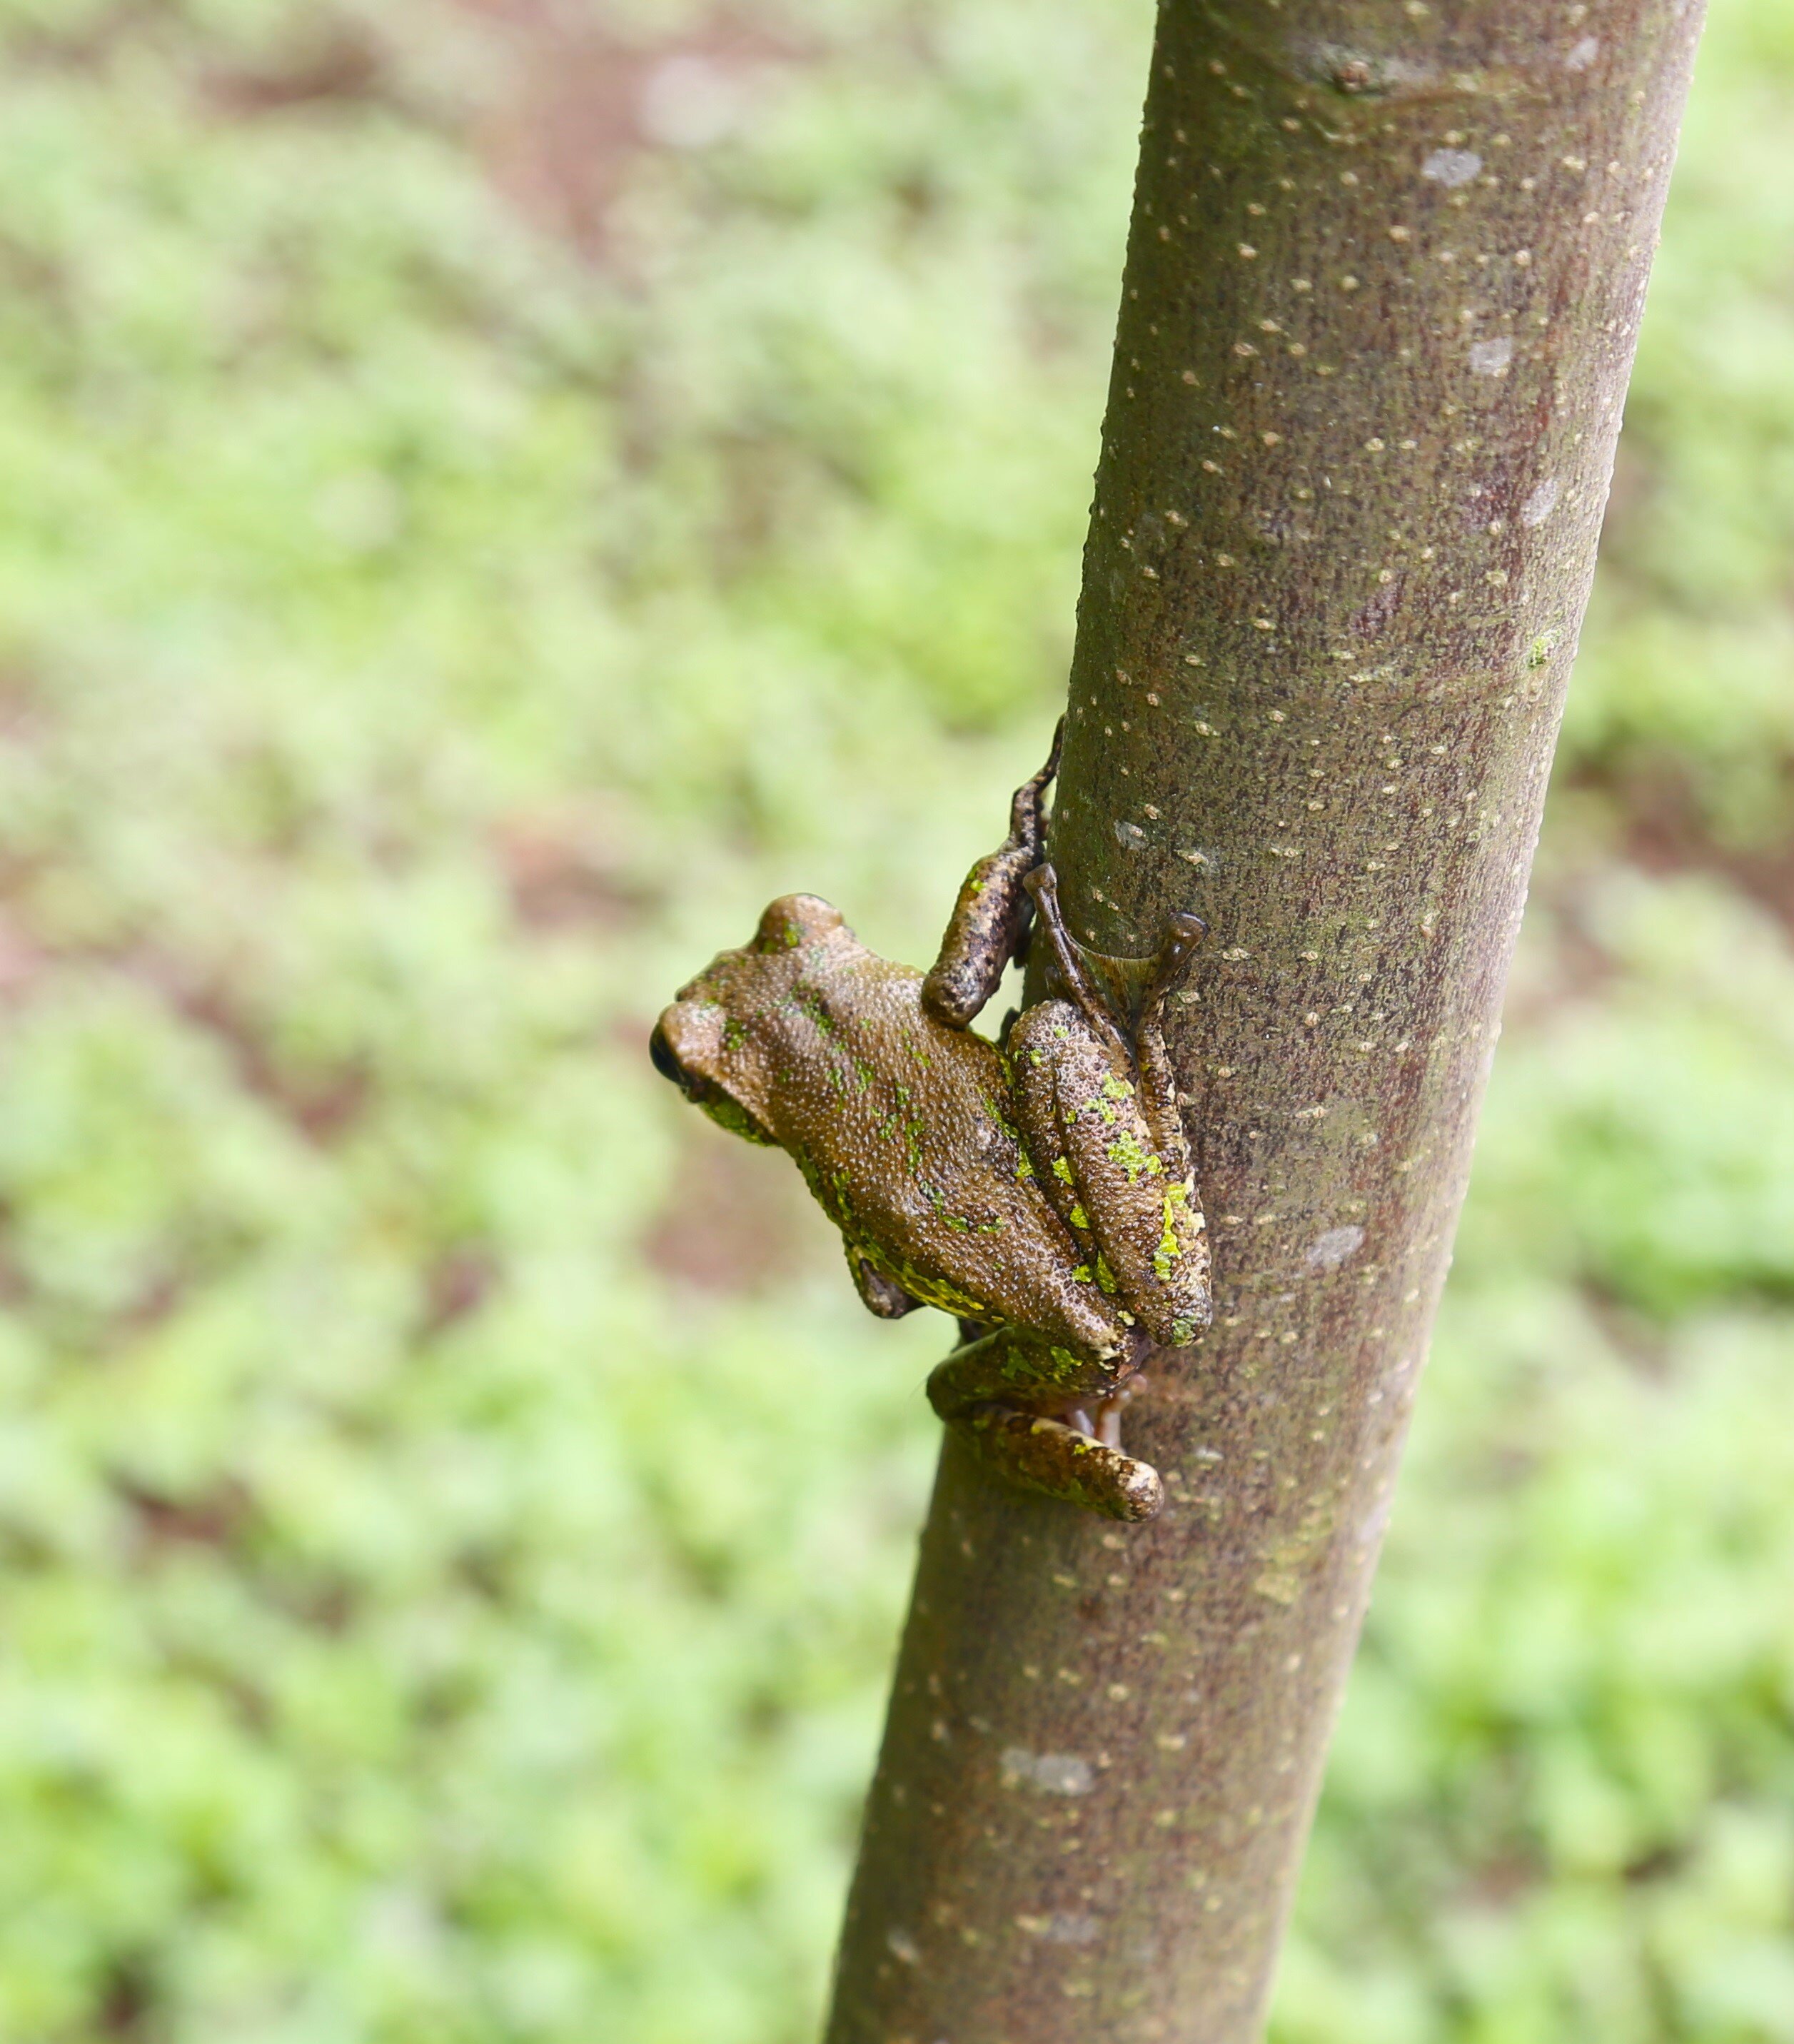 photo of Frogs use brains or camouflage to evade predators image